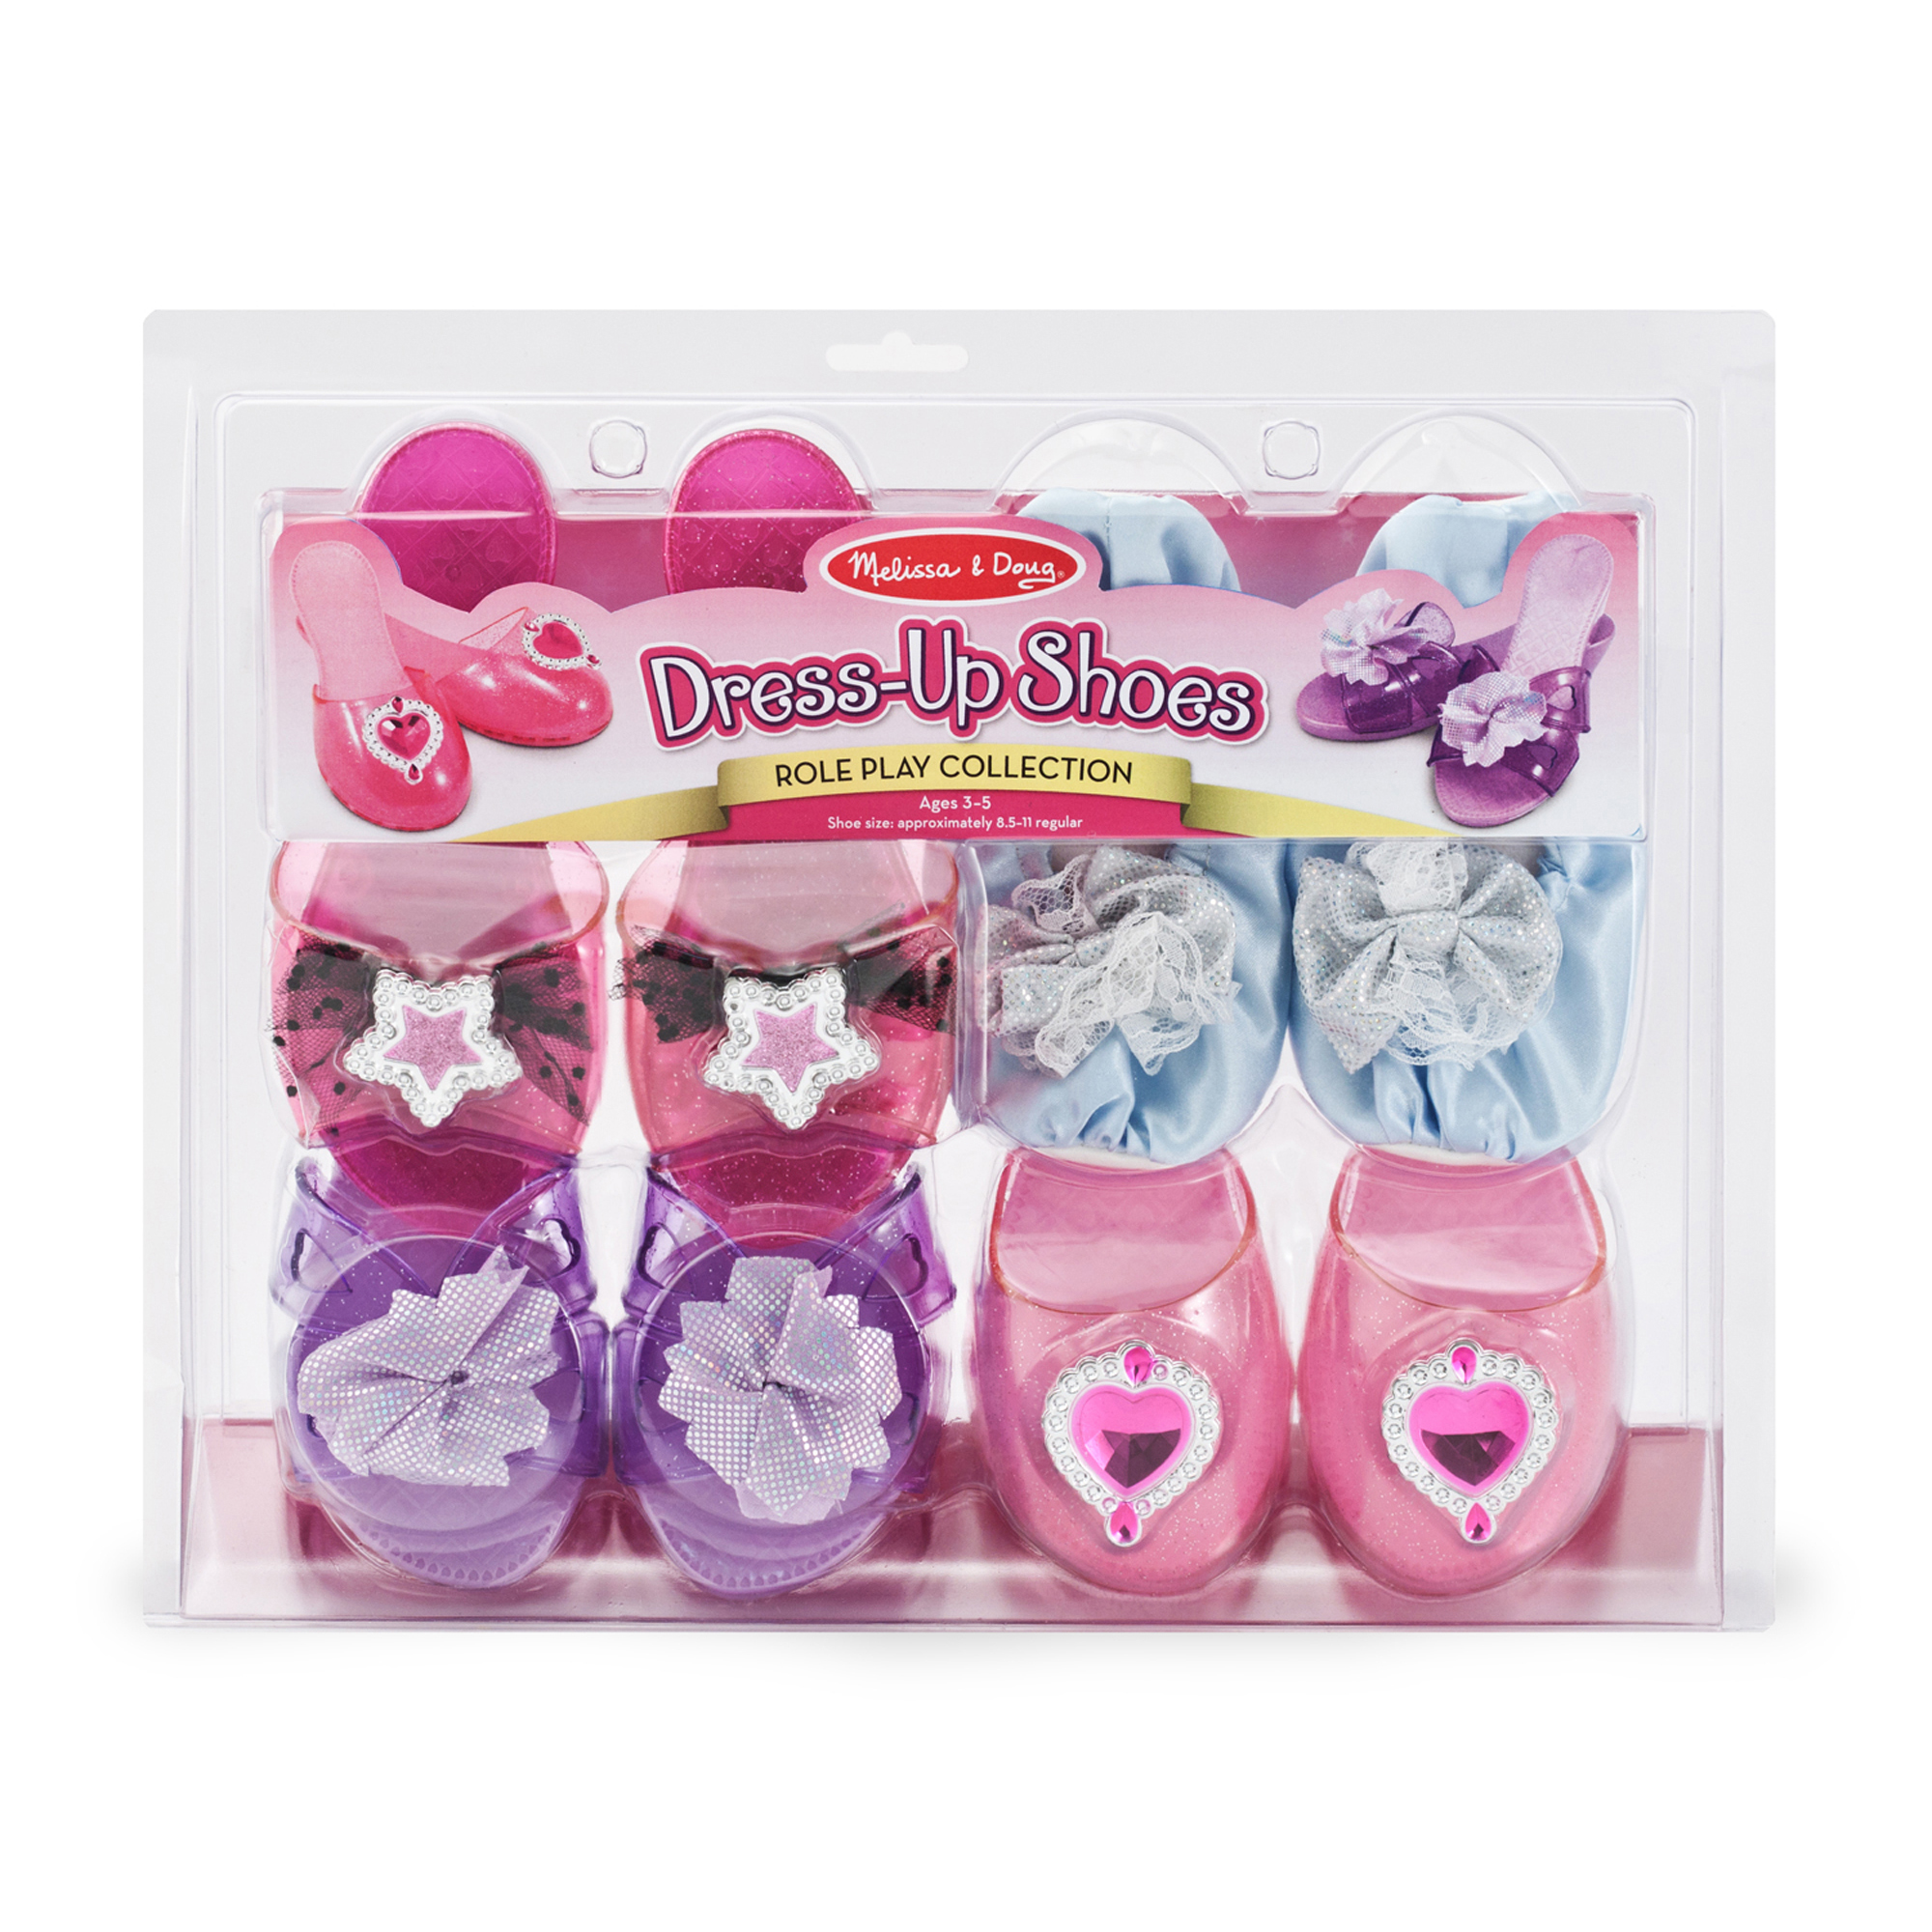 Role Play Collection, Step In Style! Dress-up Shoes, Pretend Play, Set (4 Pairs), 11" H X 12" W X 4.5" L